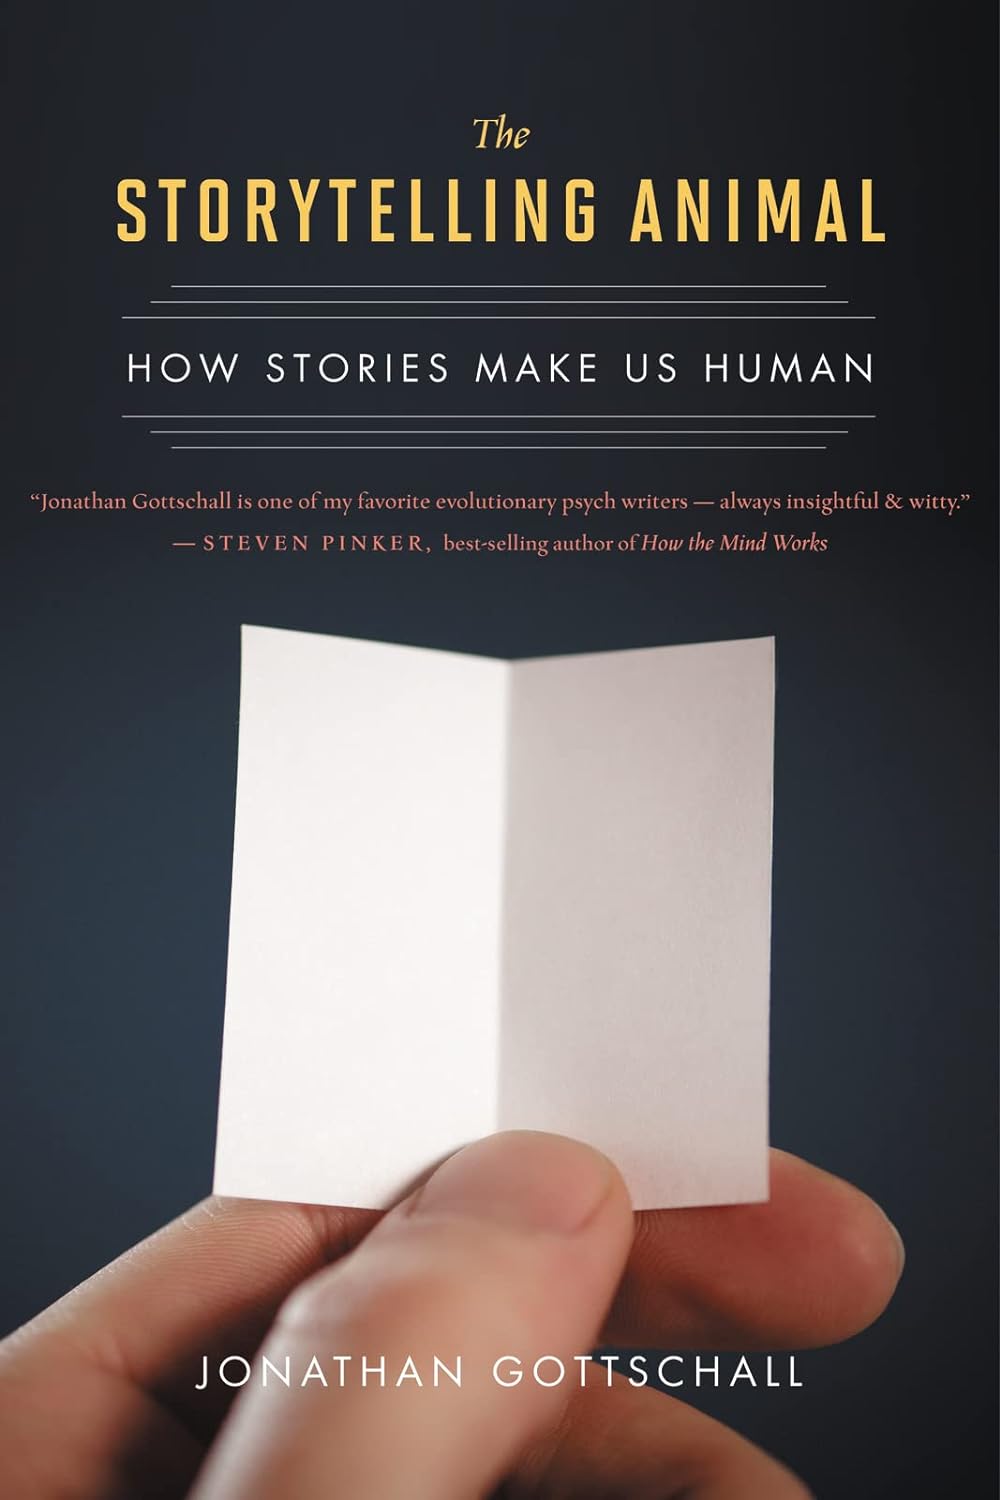 This image is the cover art of the fundraising book The Storytelling Animal: How Stories Make Us Human by Jonathan Gottschall.